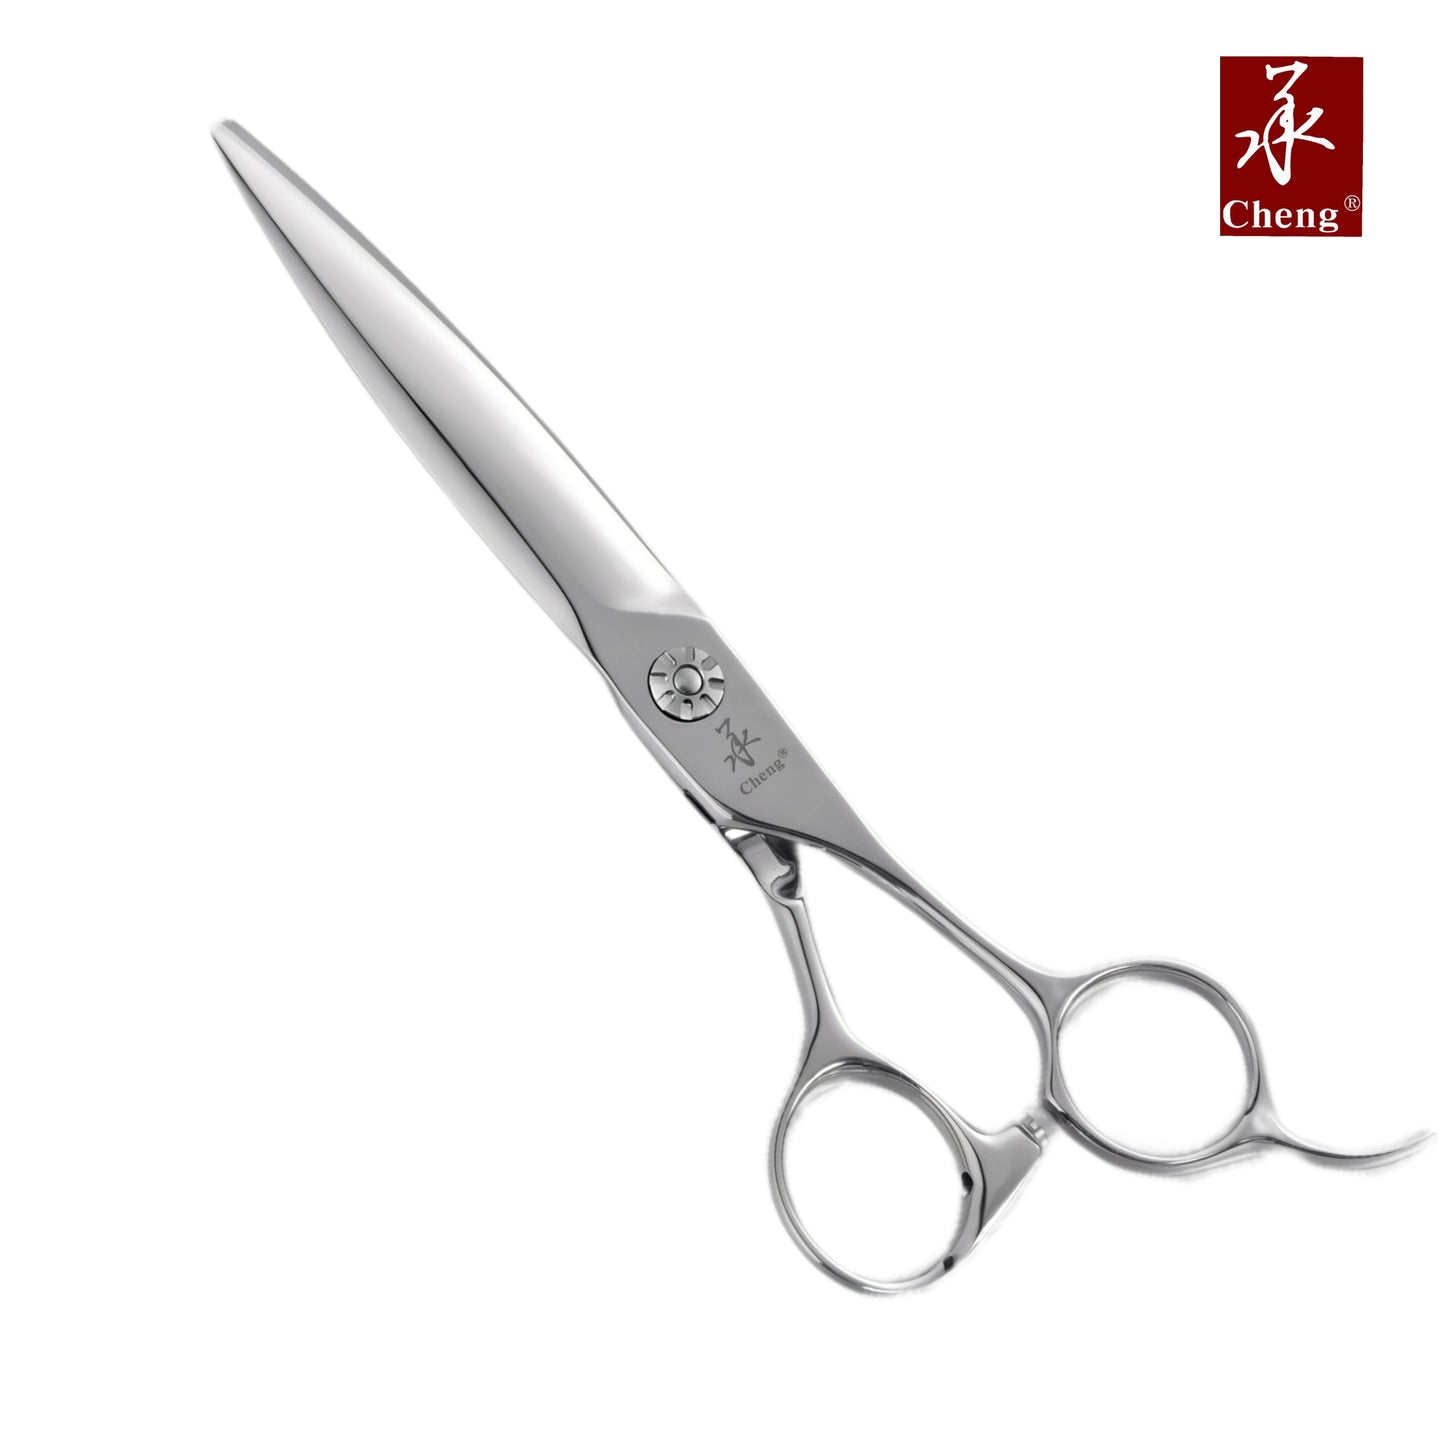 BF-623TZ Hair Thinning Shears 6.0Inch Salon Barbers Scissors About=25%~30%